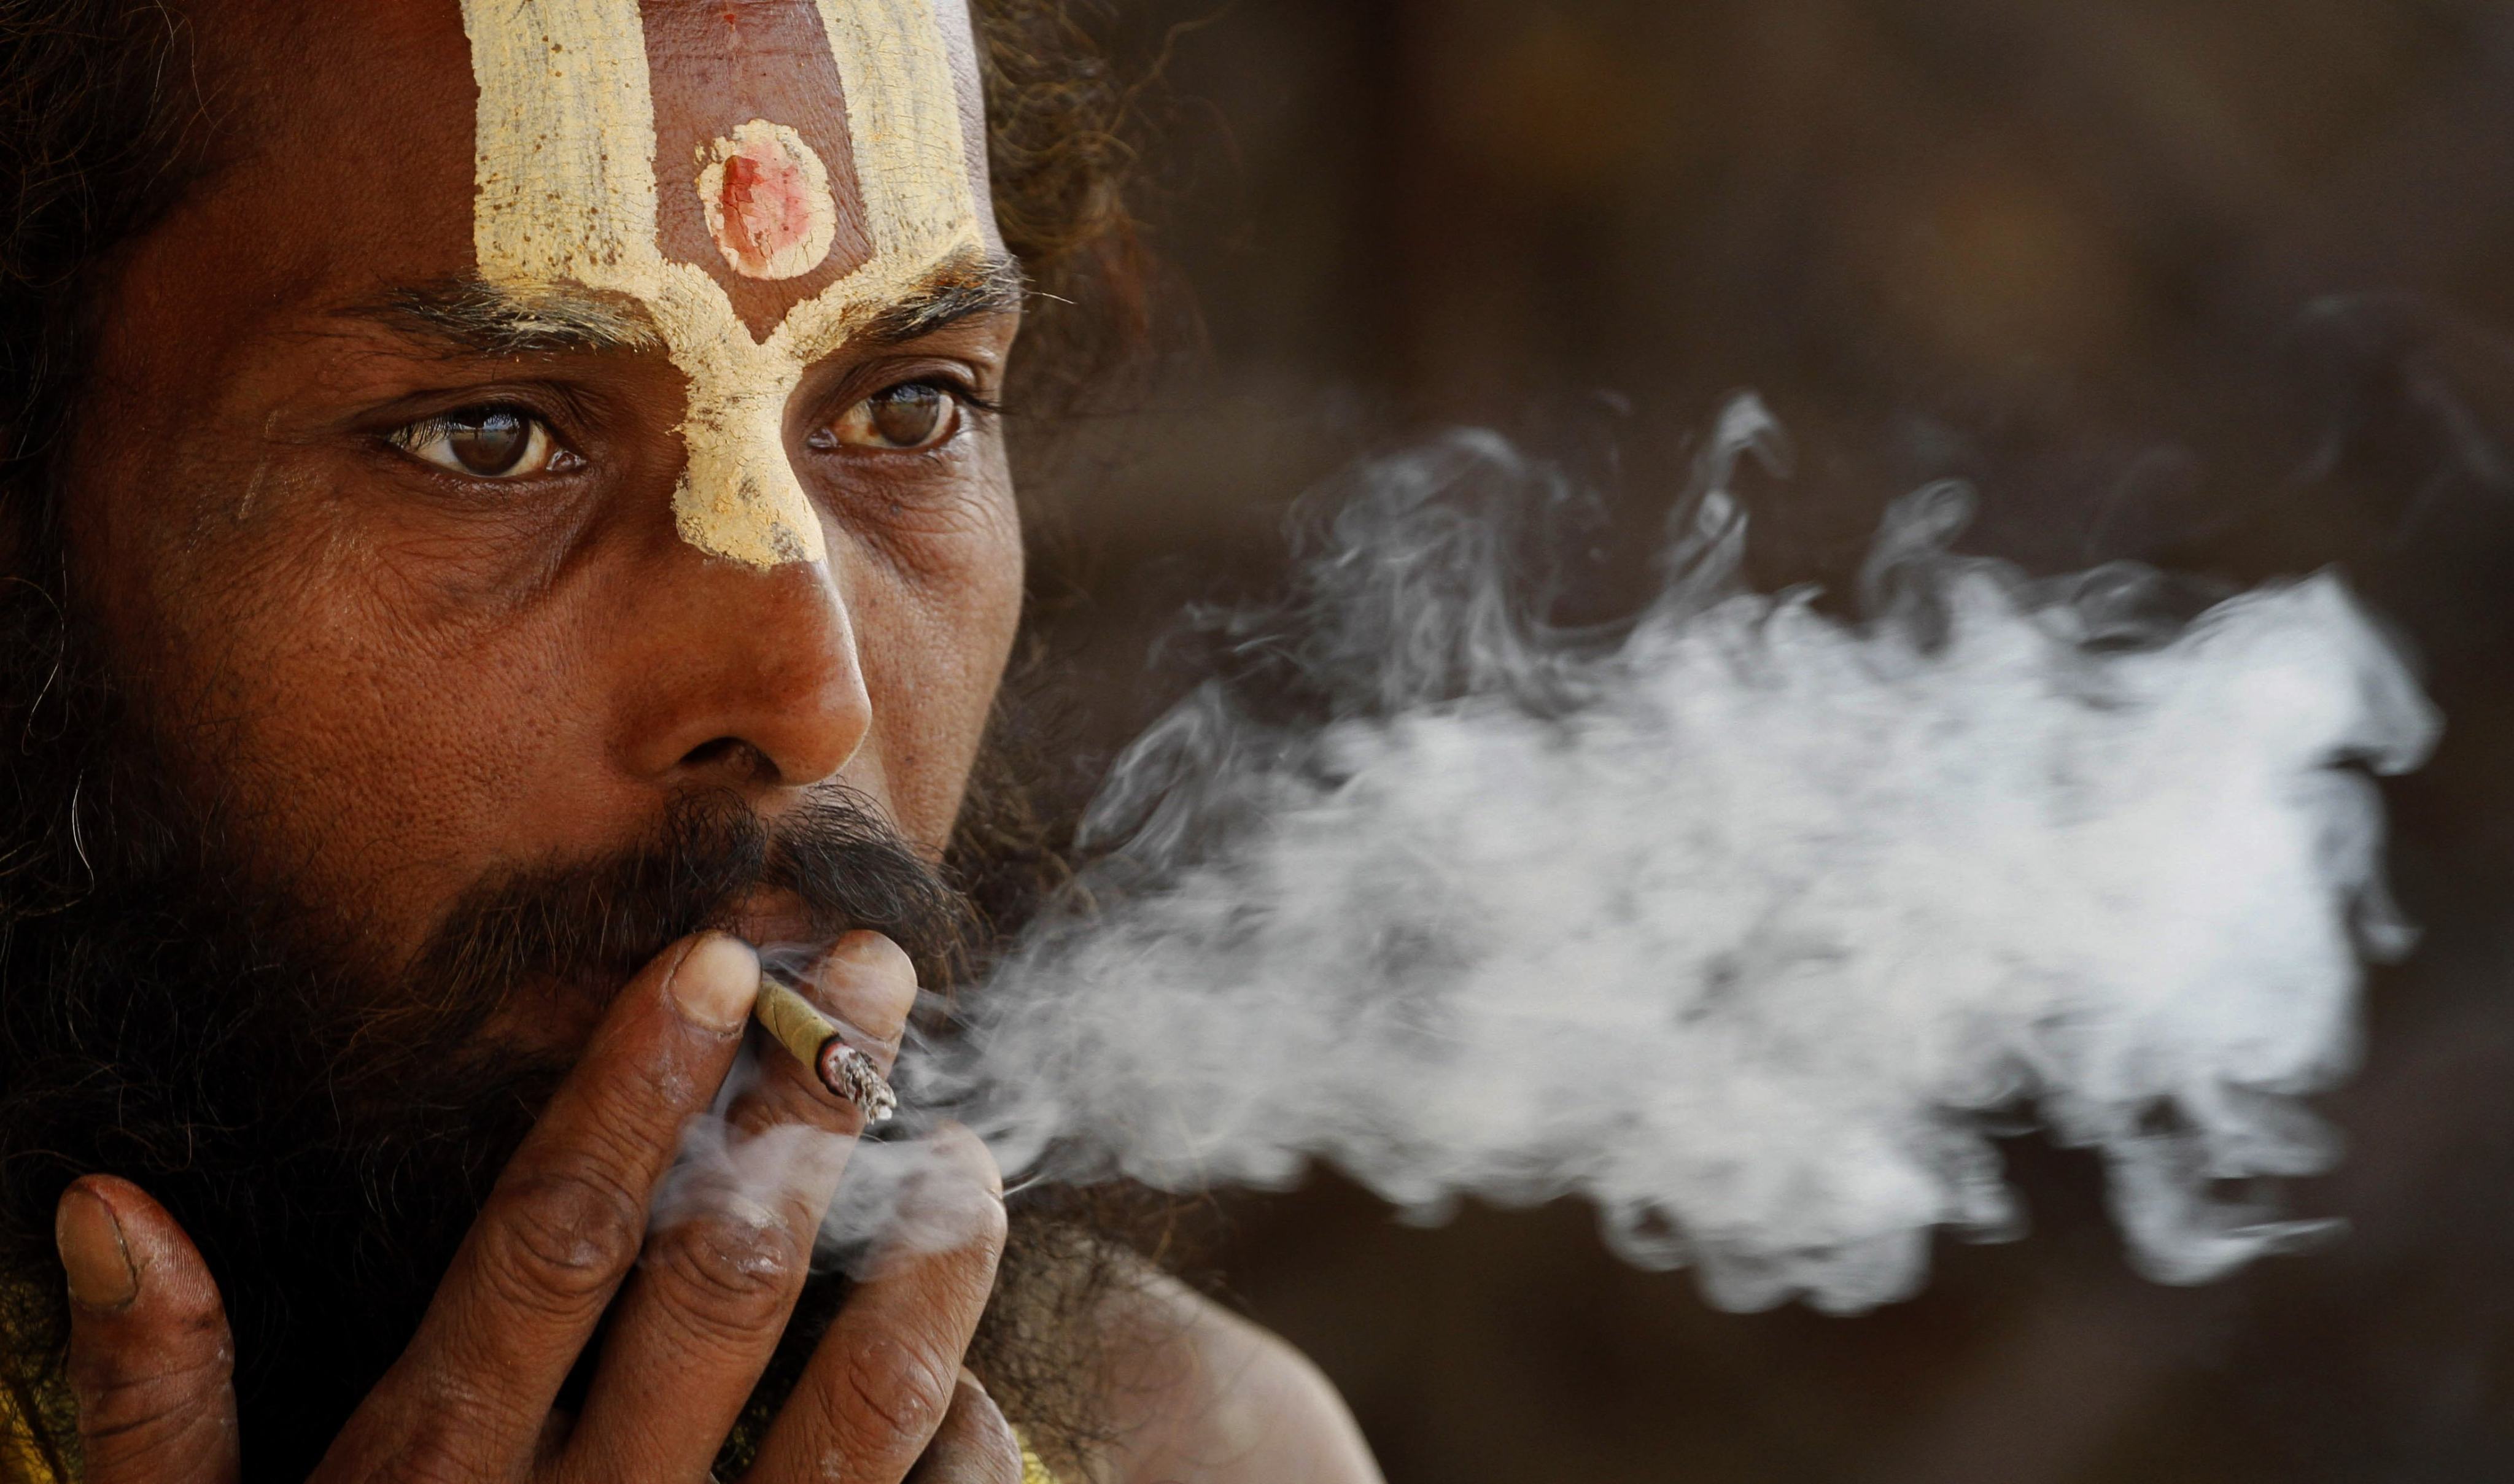 A Hindu holy man smokes ‘bidi’, or a small hand-rolled Indian cigarette, in Allahabad. File photo: AP